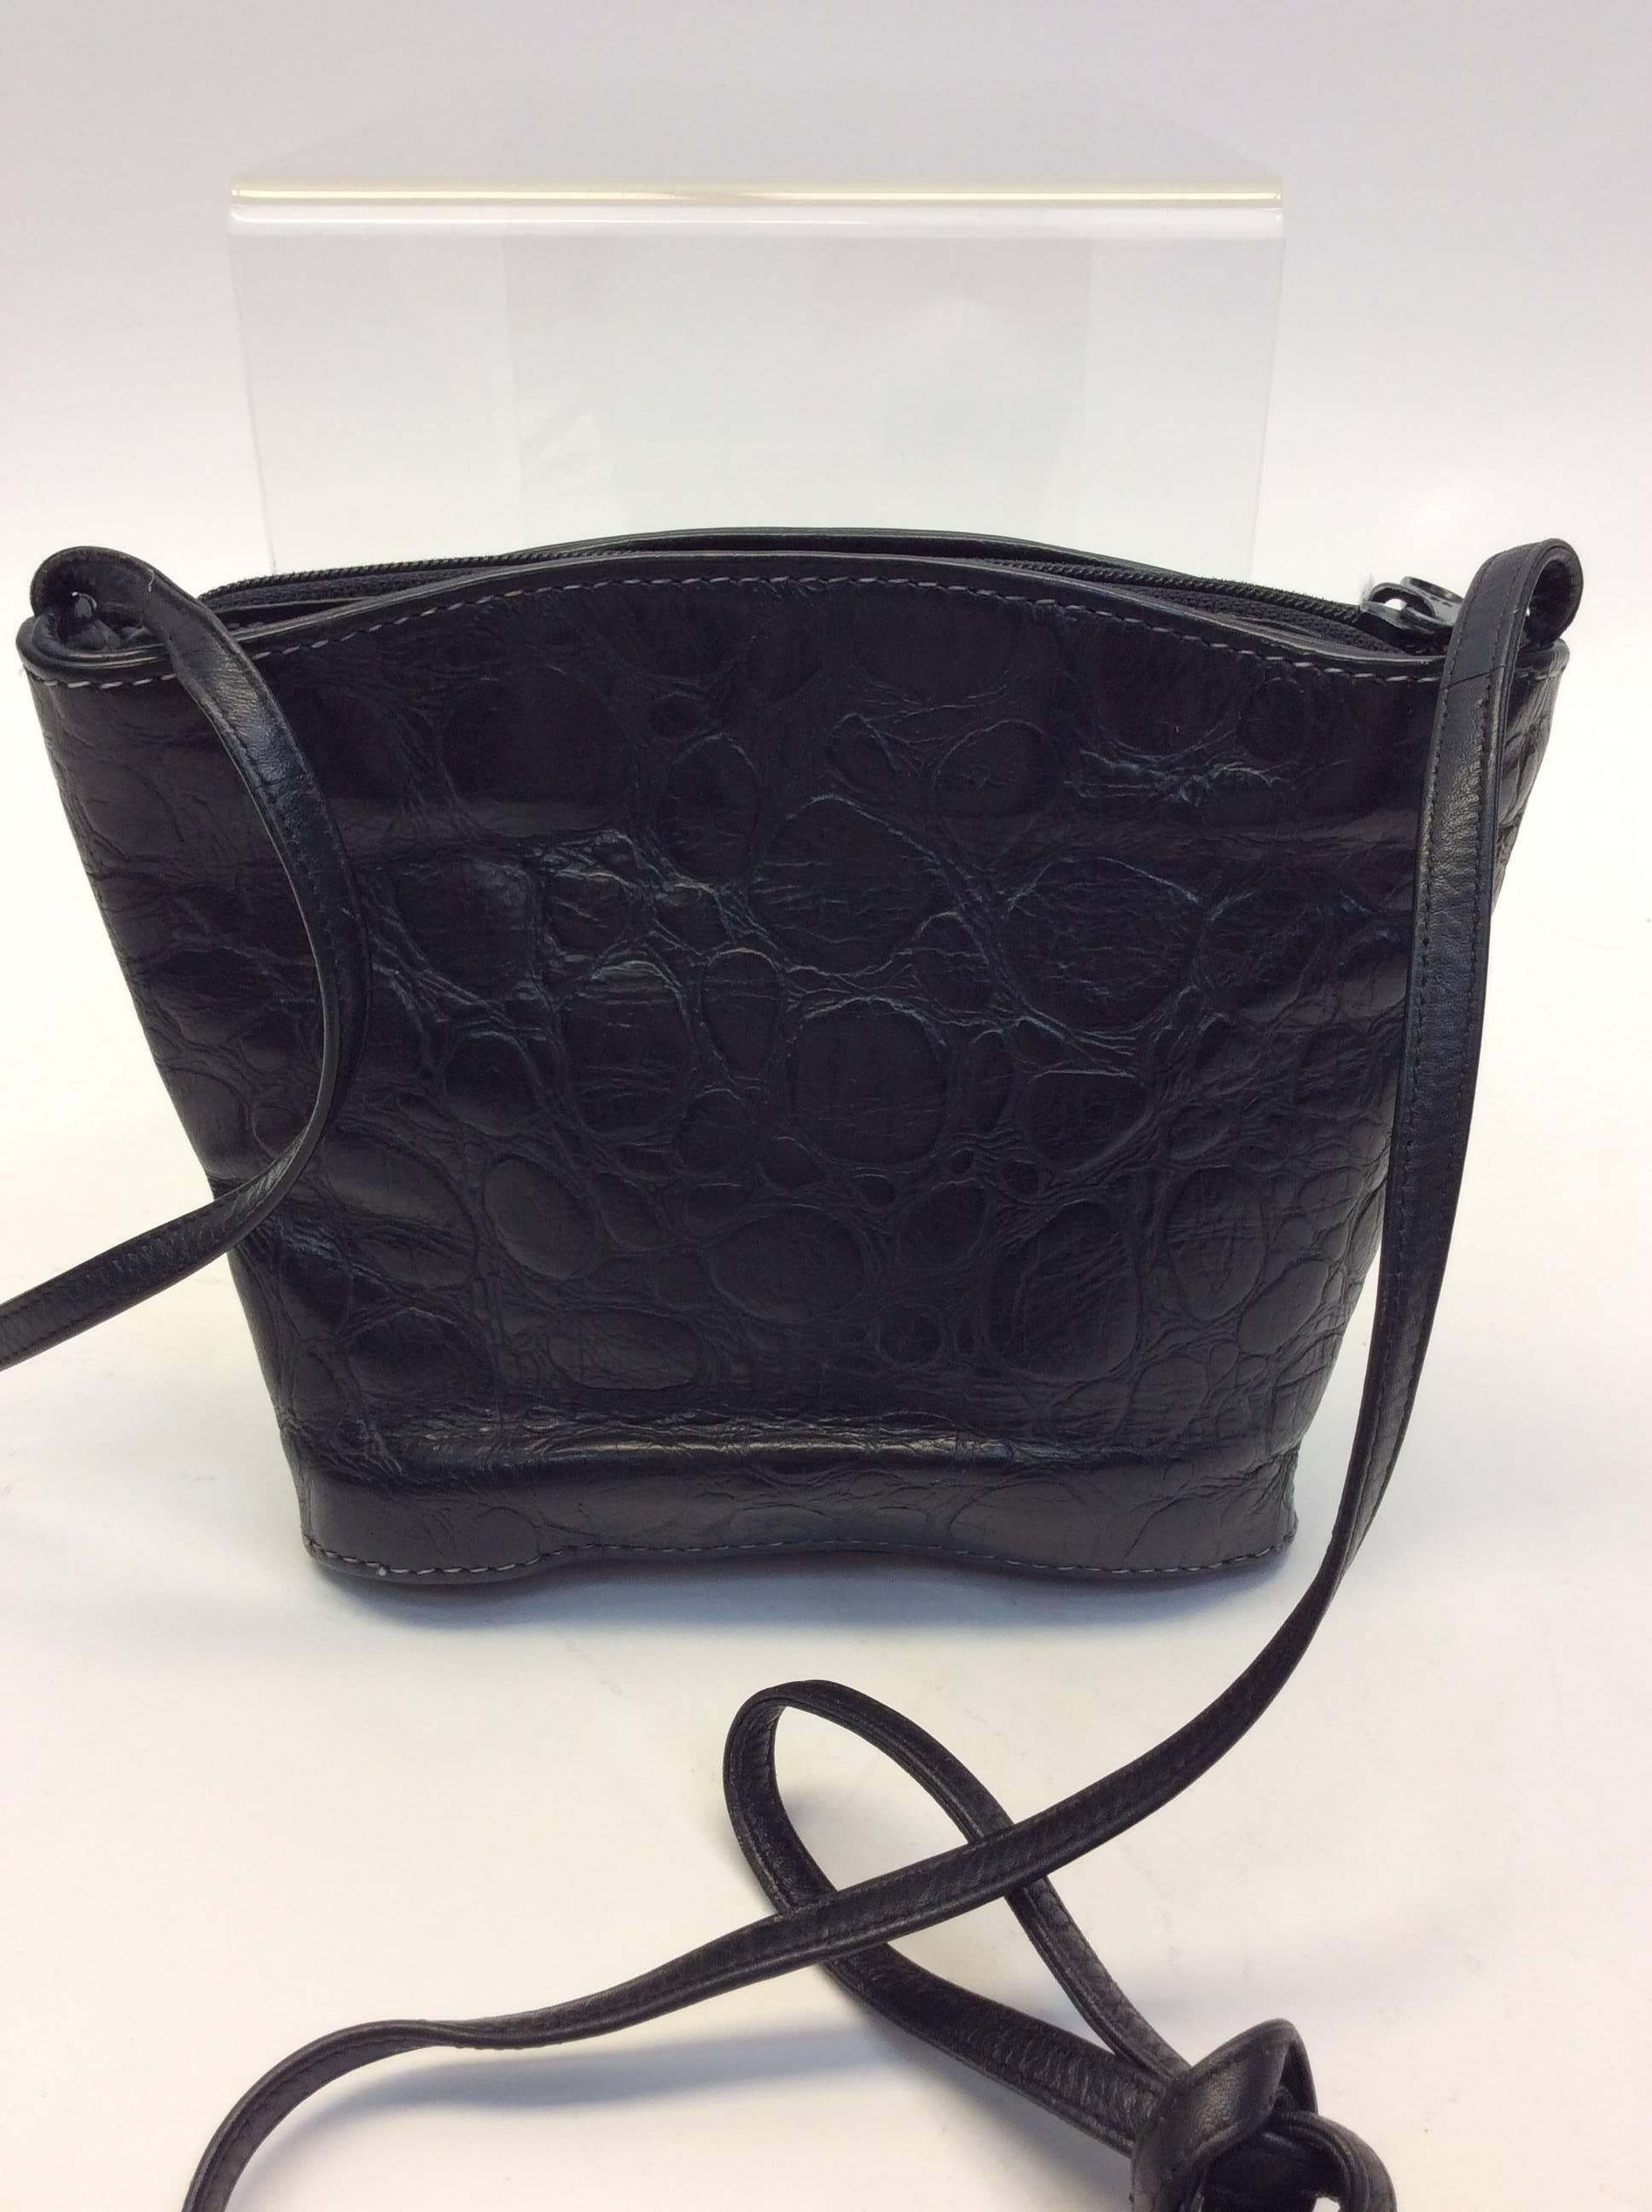 Carlos Falchi Vintage Black Leather Crossbody In Fair Condition For Sale In Narberth, PA